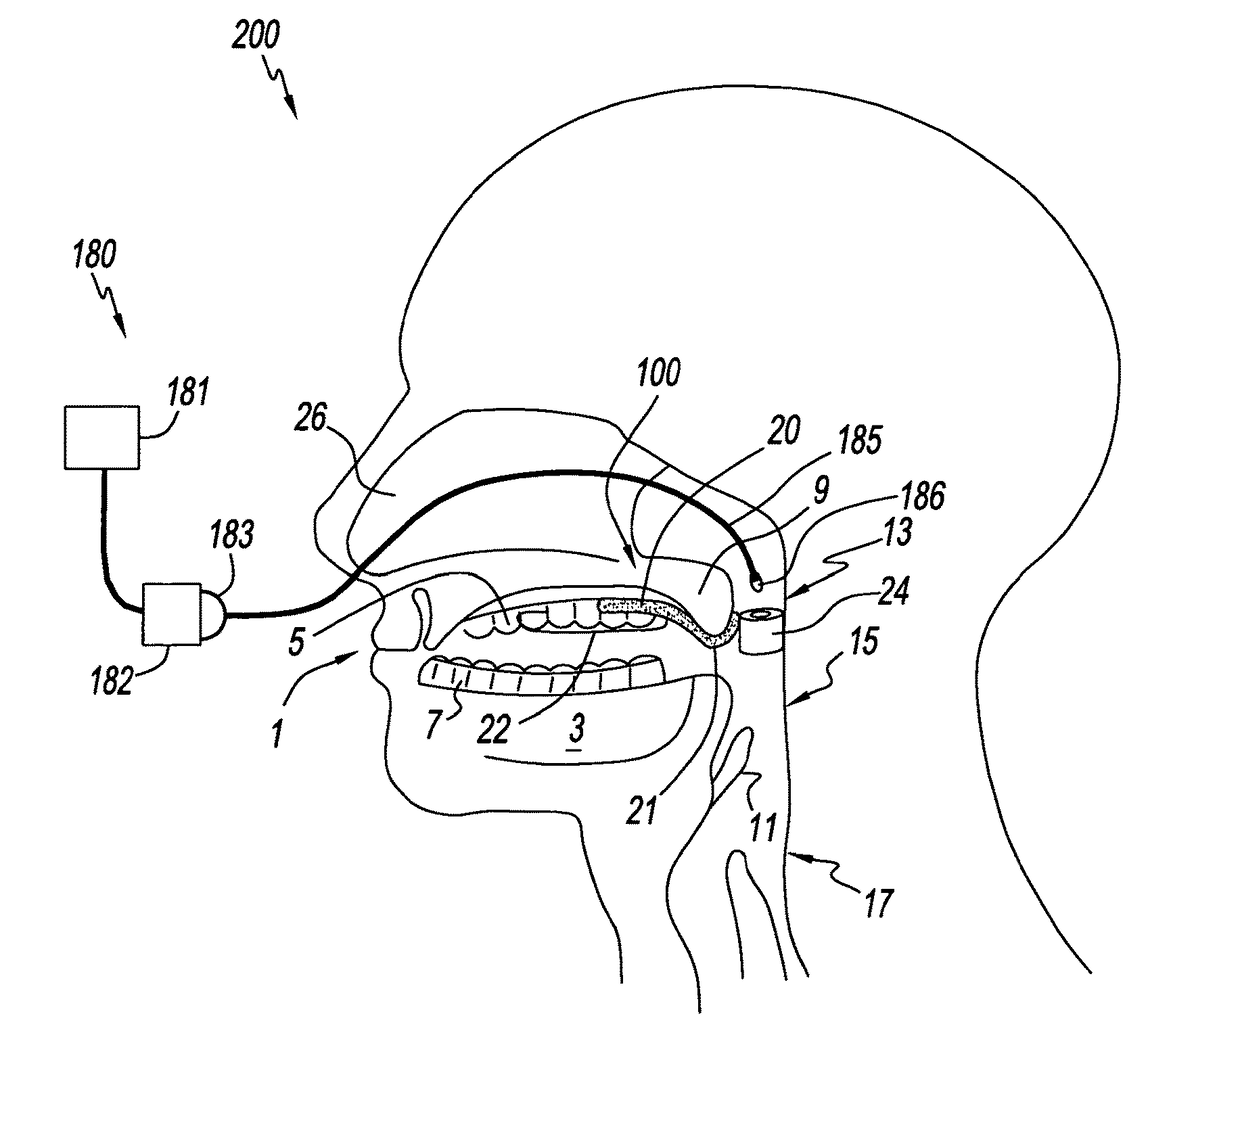 Palate retainer with attached nasopharyngeal airway extender for use in the treatment of obstructive sleep apnea